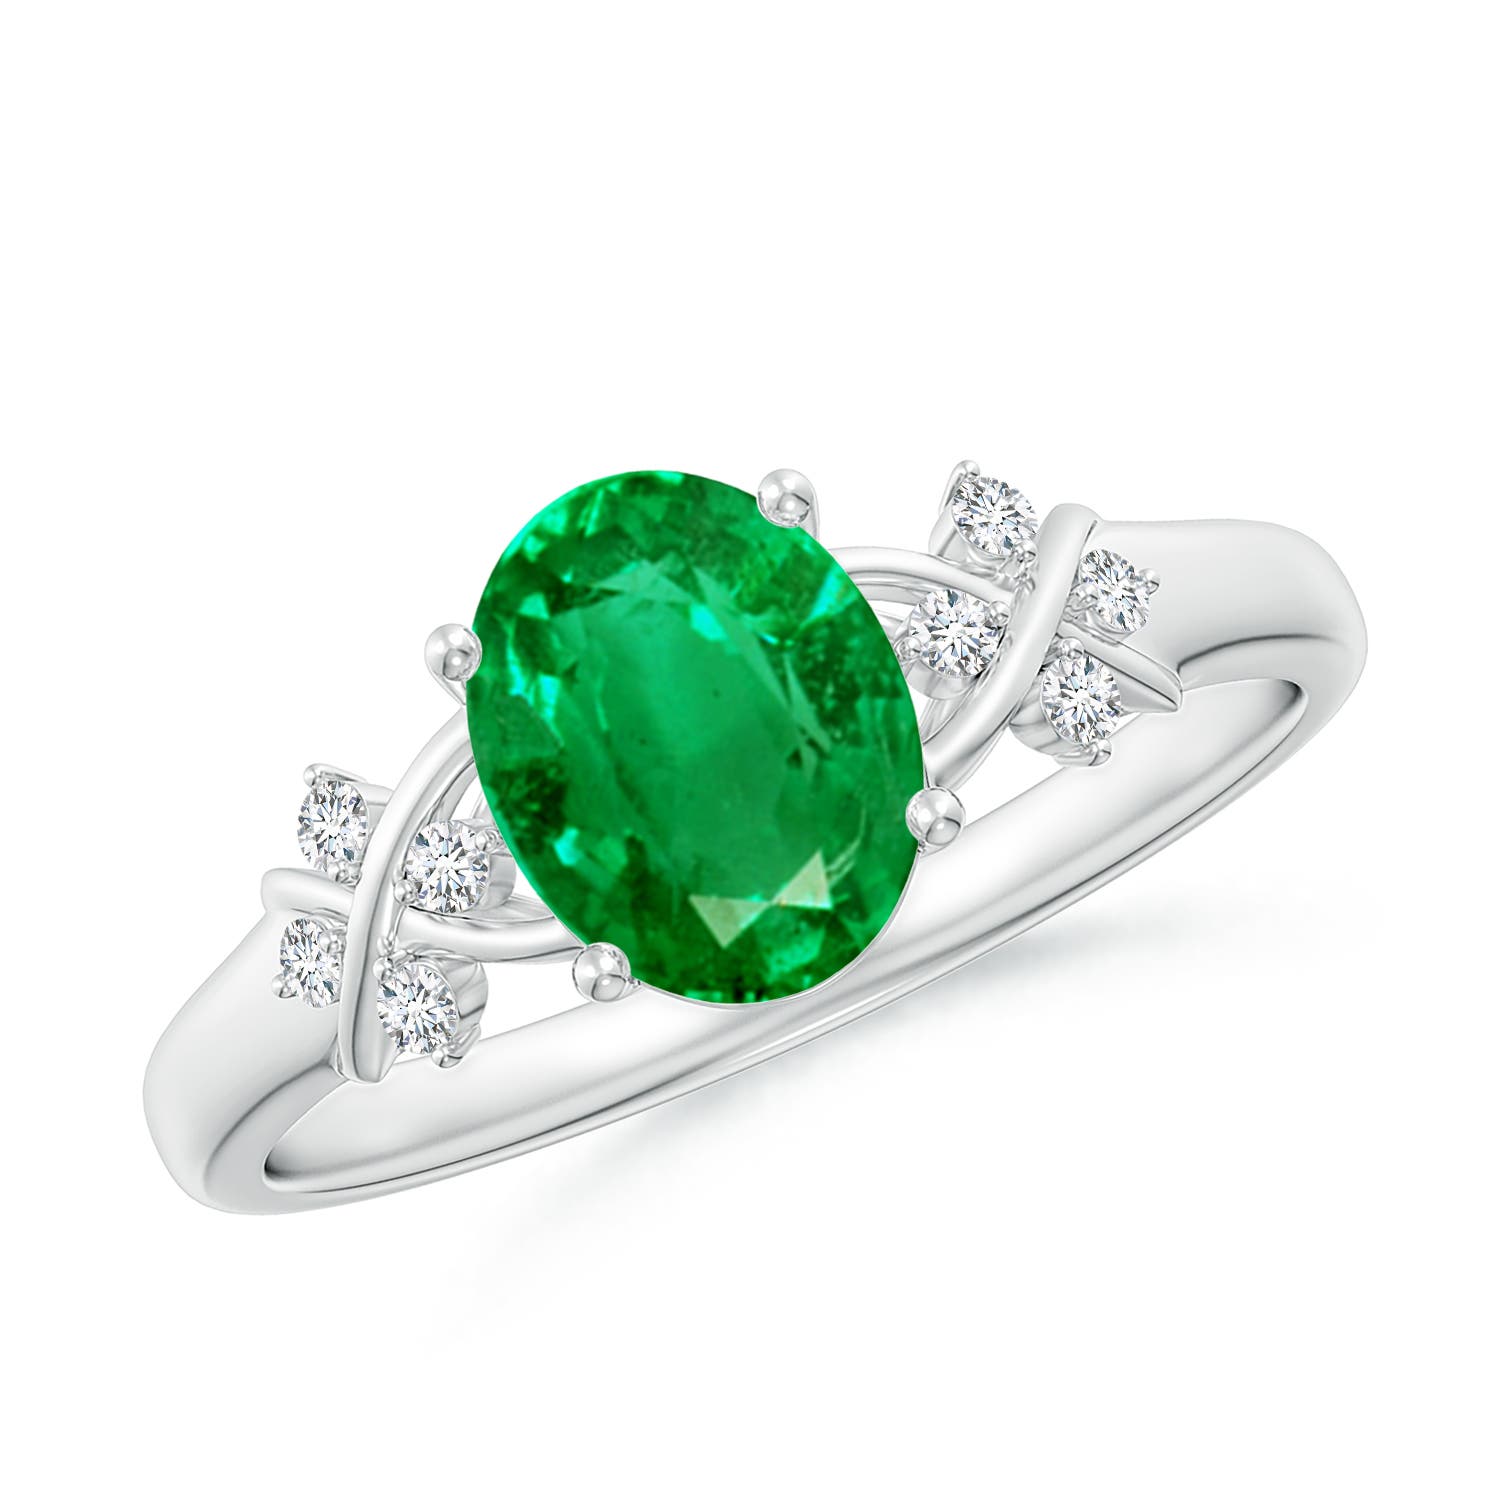 Solitaire Oval Emerald Criss Cross Ring with Diamonds